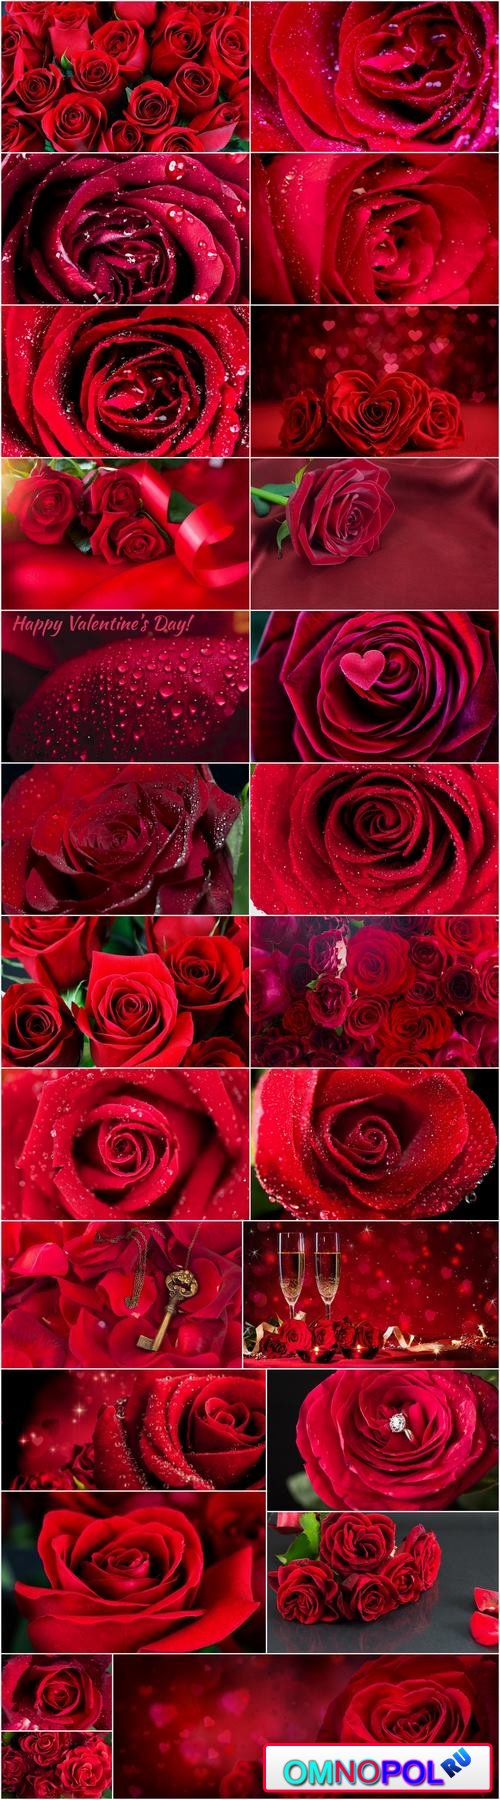 Rose background is Valentines Day gift petal red flower 25 HQ Jpeg